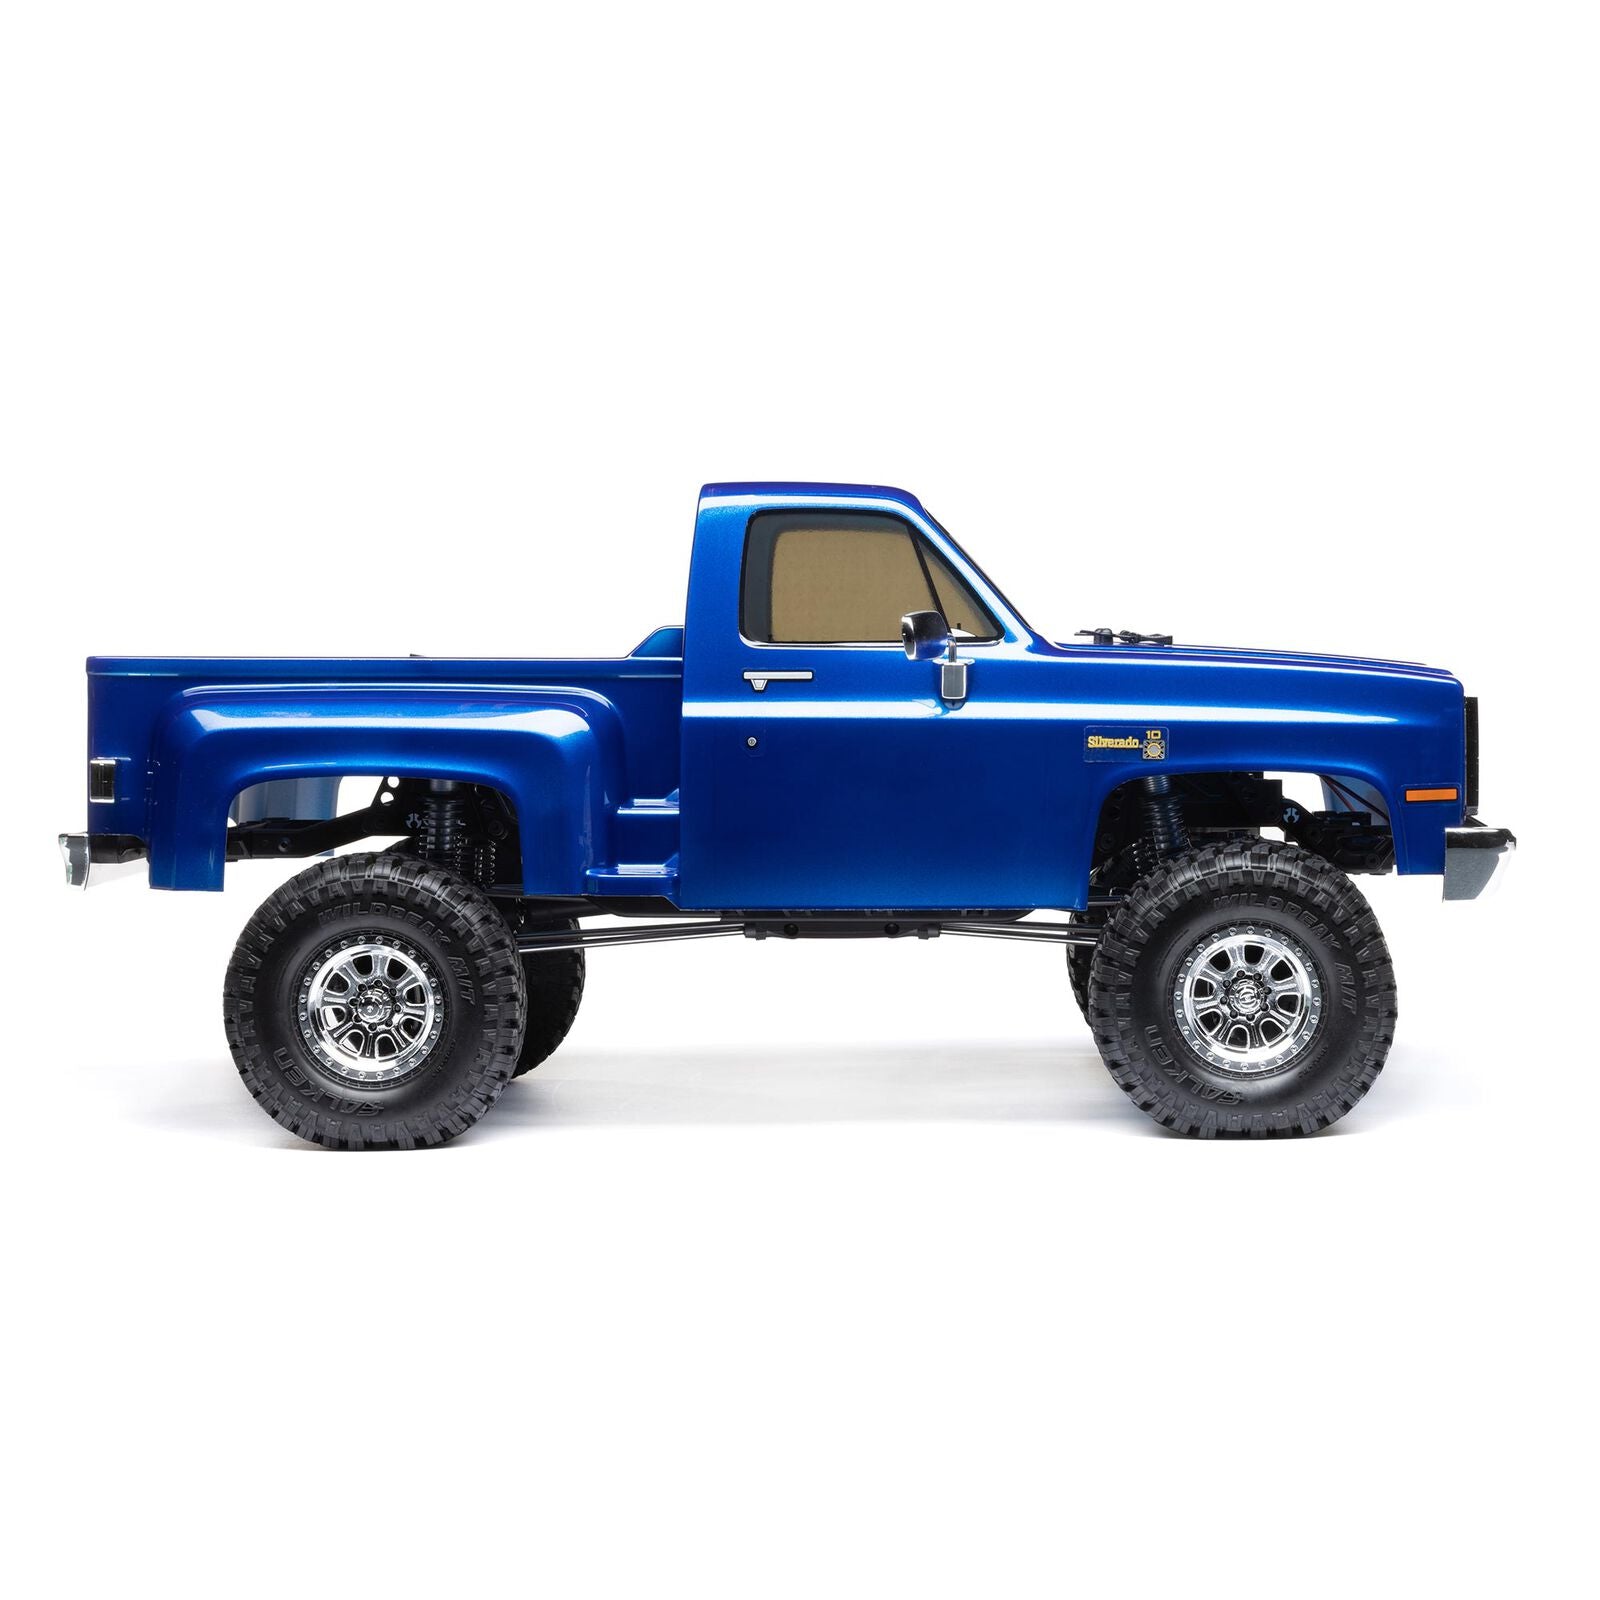 Axial SCX10 III Chevy K10 1982 Base Camp 4WD RTR AXI03030